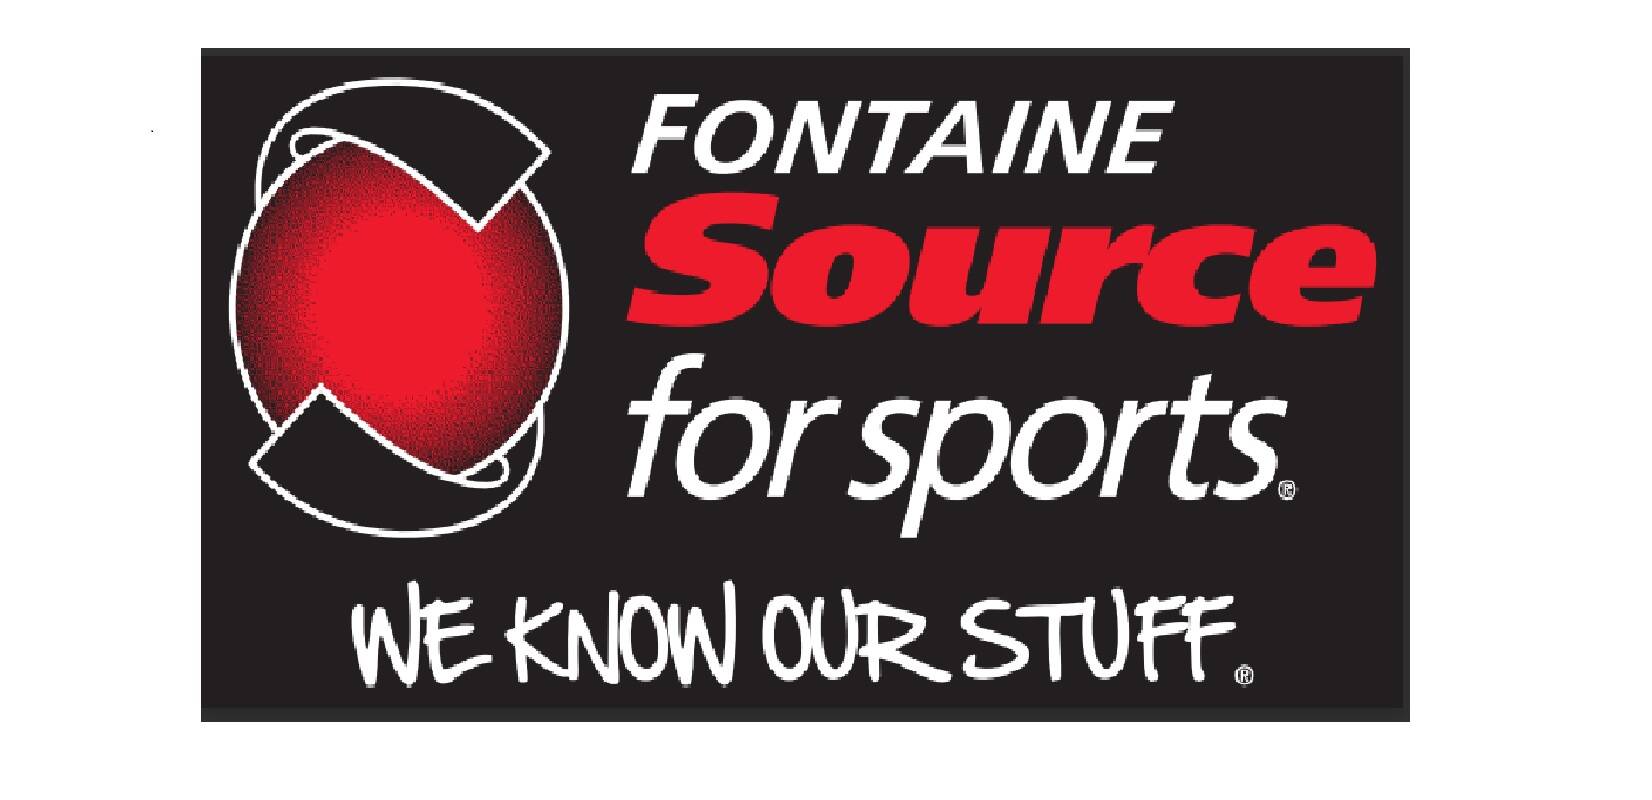 Fontaine Source for Sports